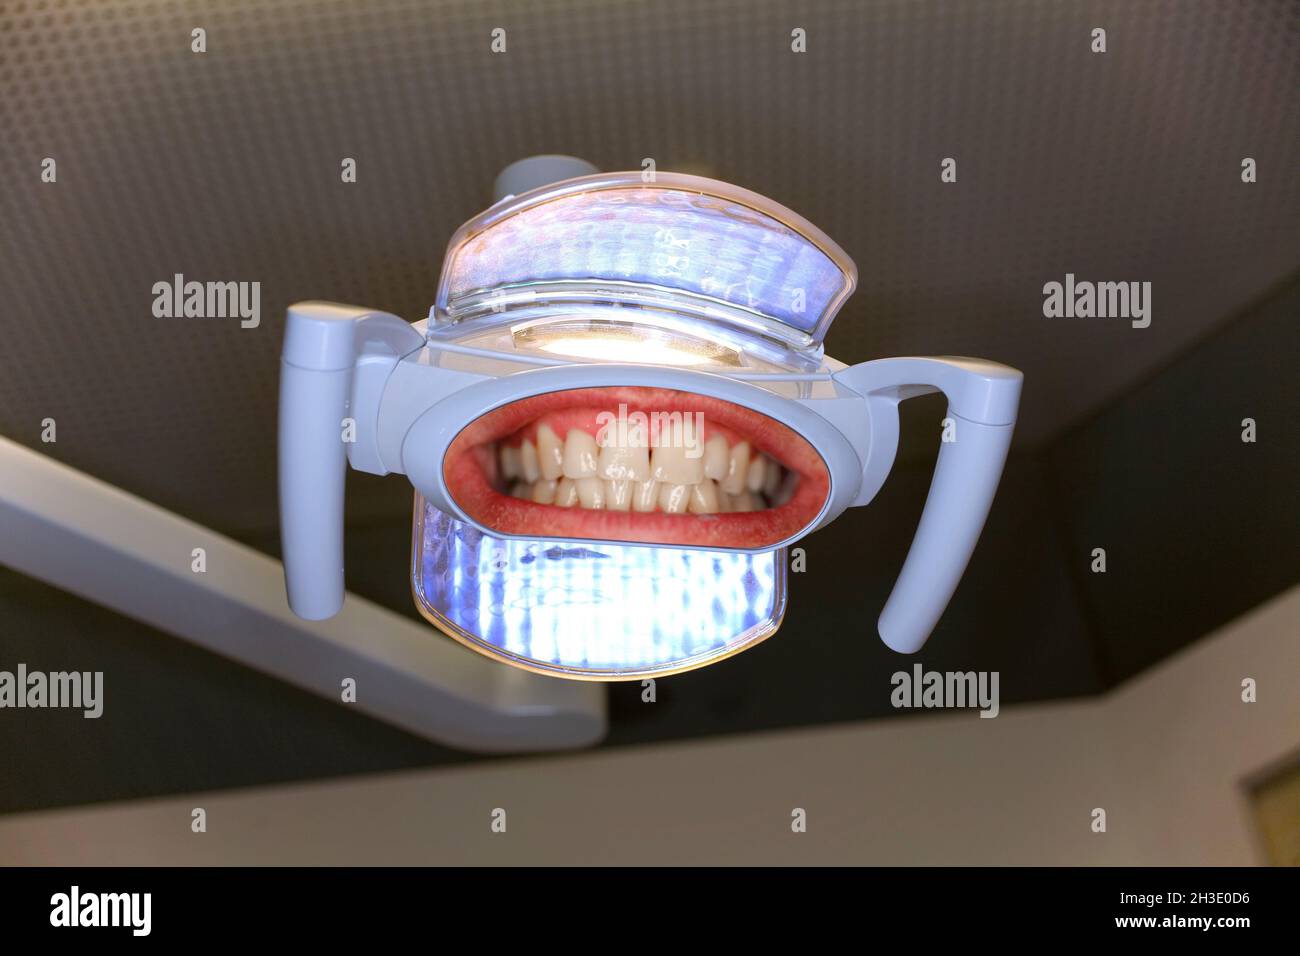 mouth reflecting in Dentist lamp, composing Stock Photo